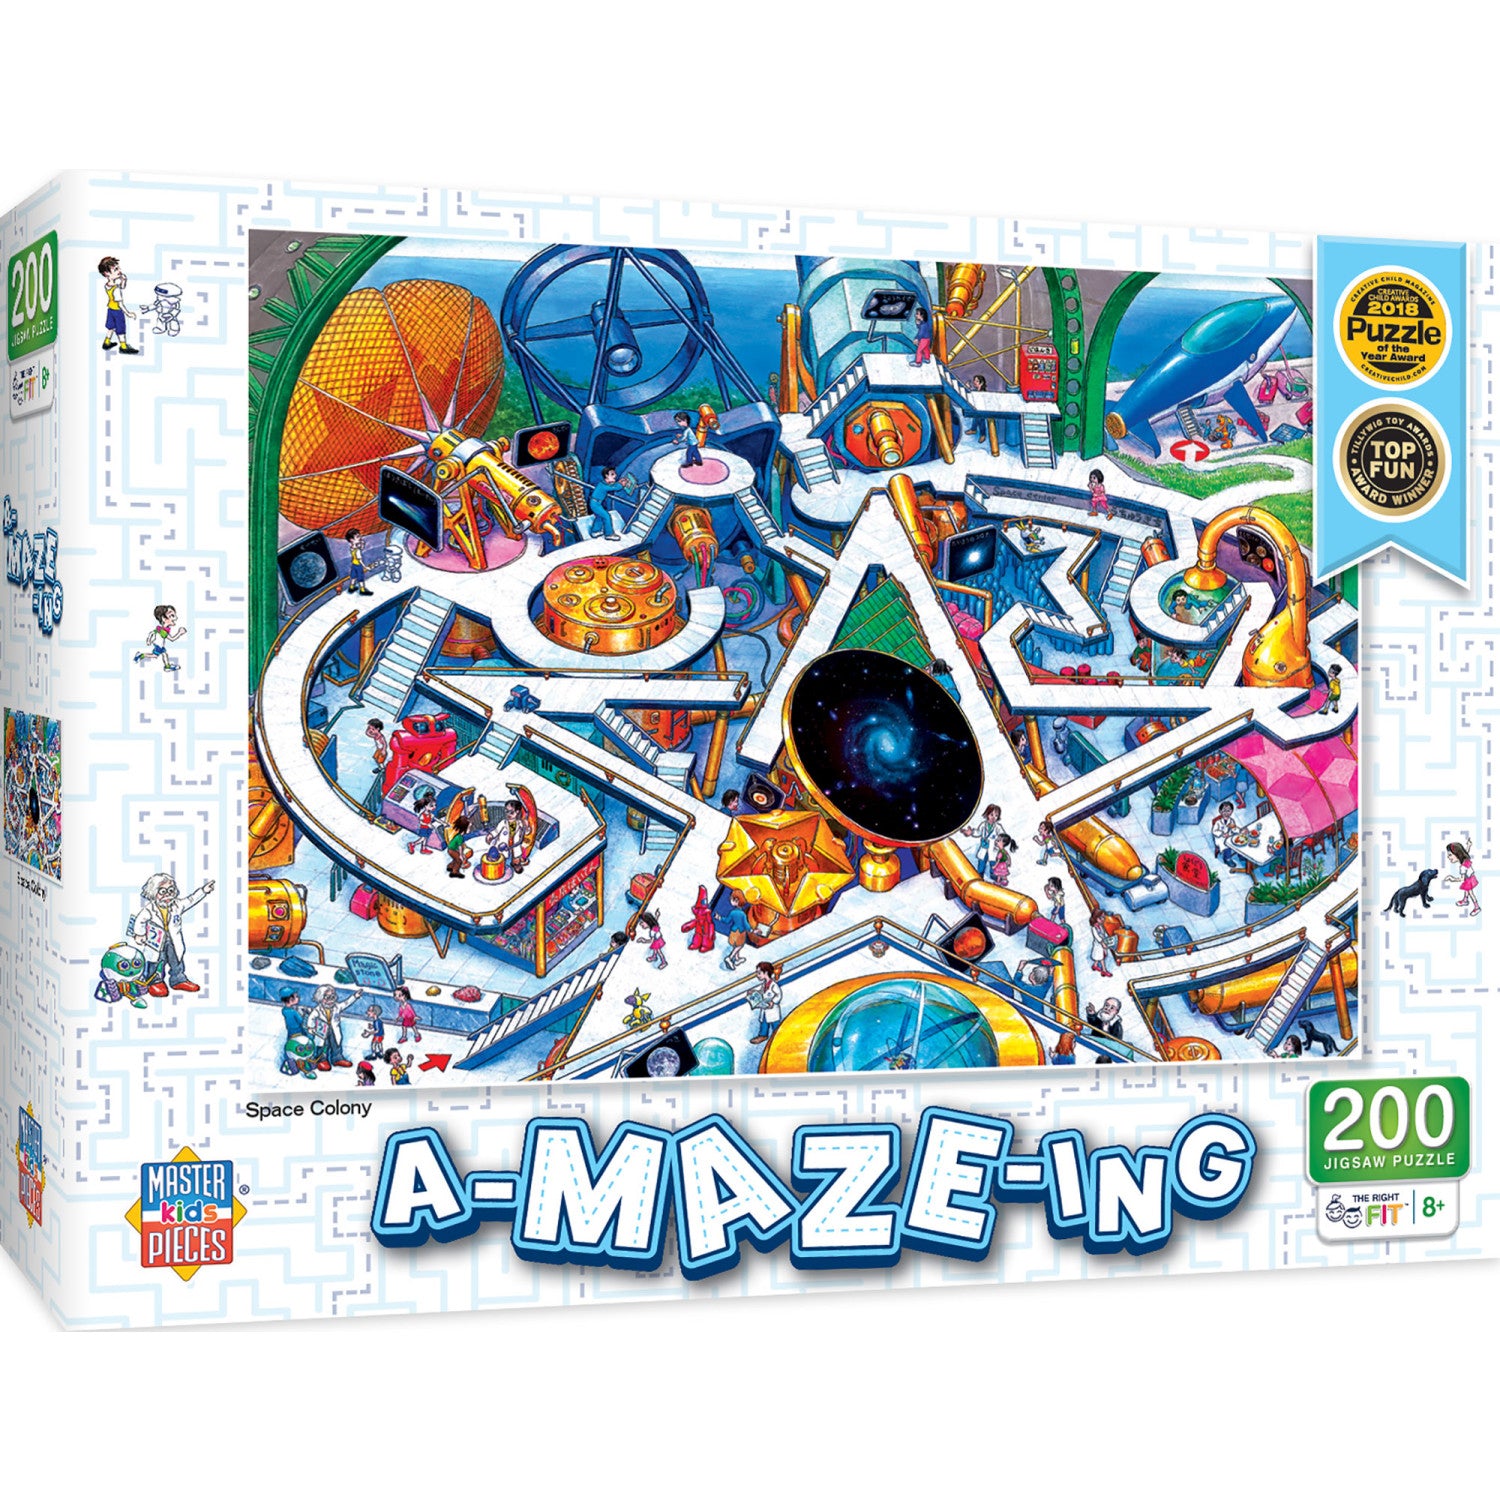 A-Maze-ing - Space Colony 200 Piece Puzzle